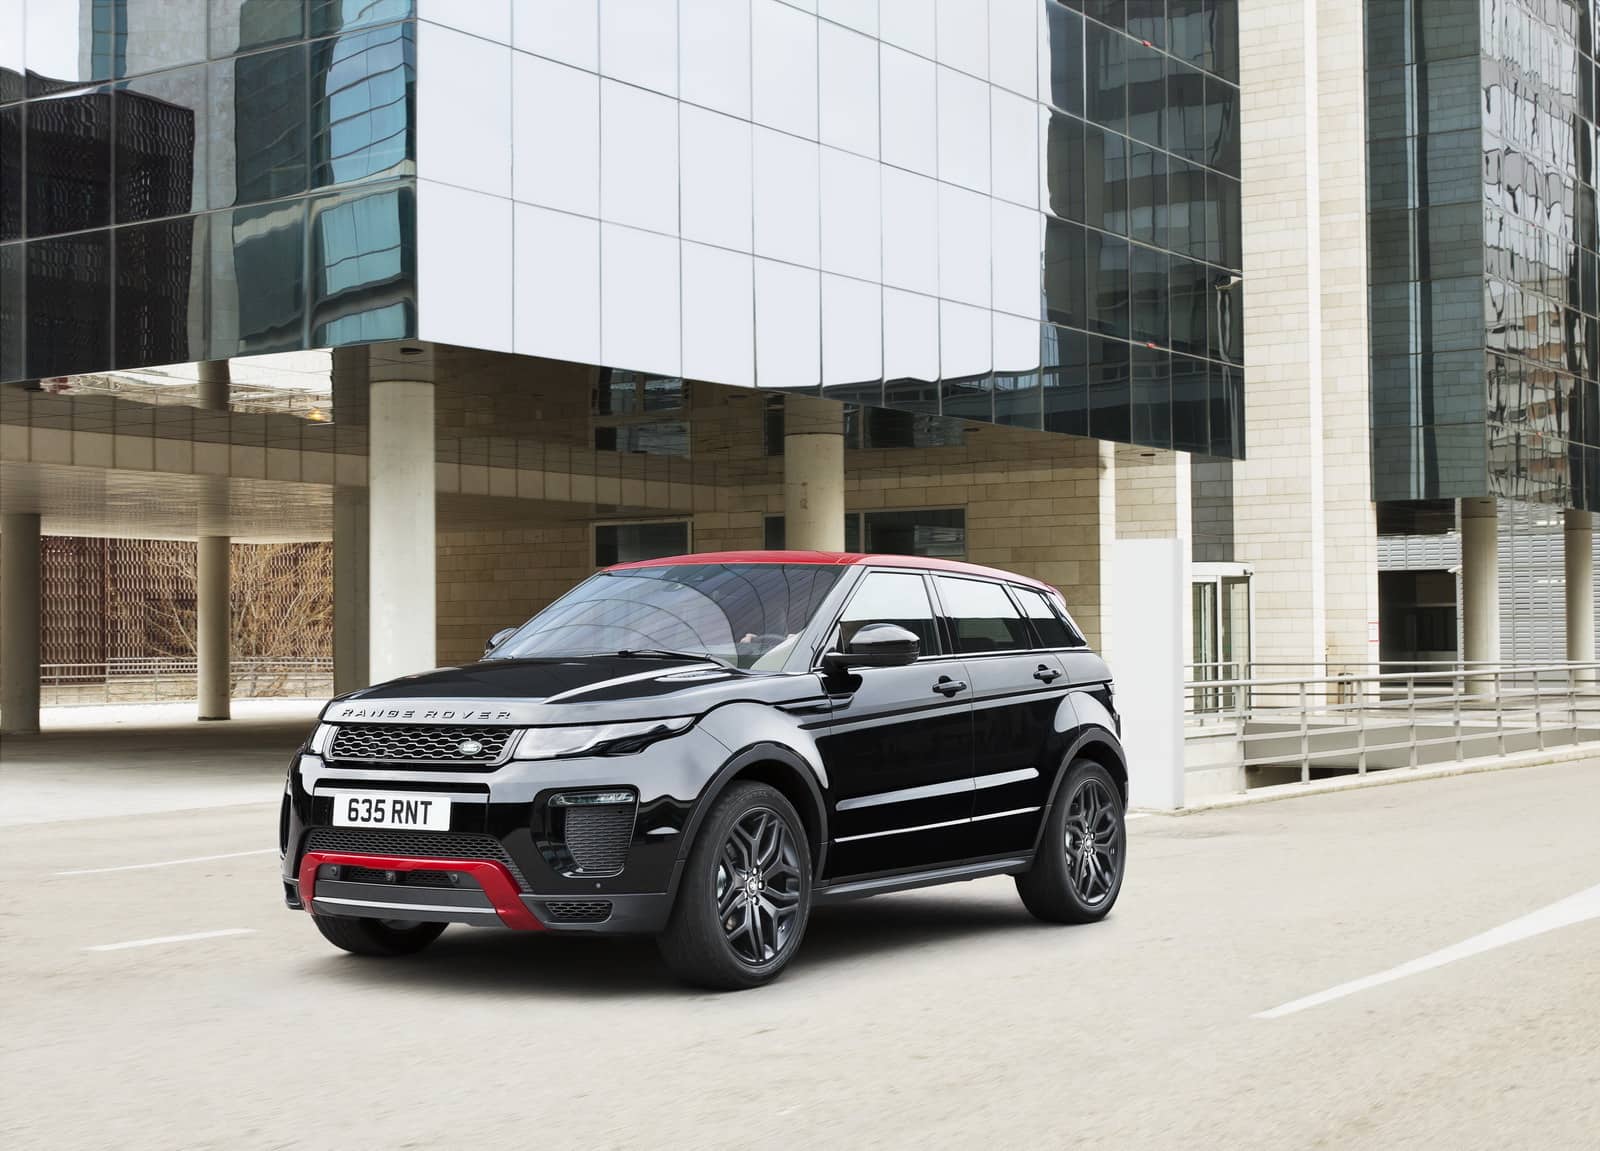 2017-Range-Rover-Evoque-Ember-Limited-Edition-8